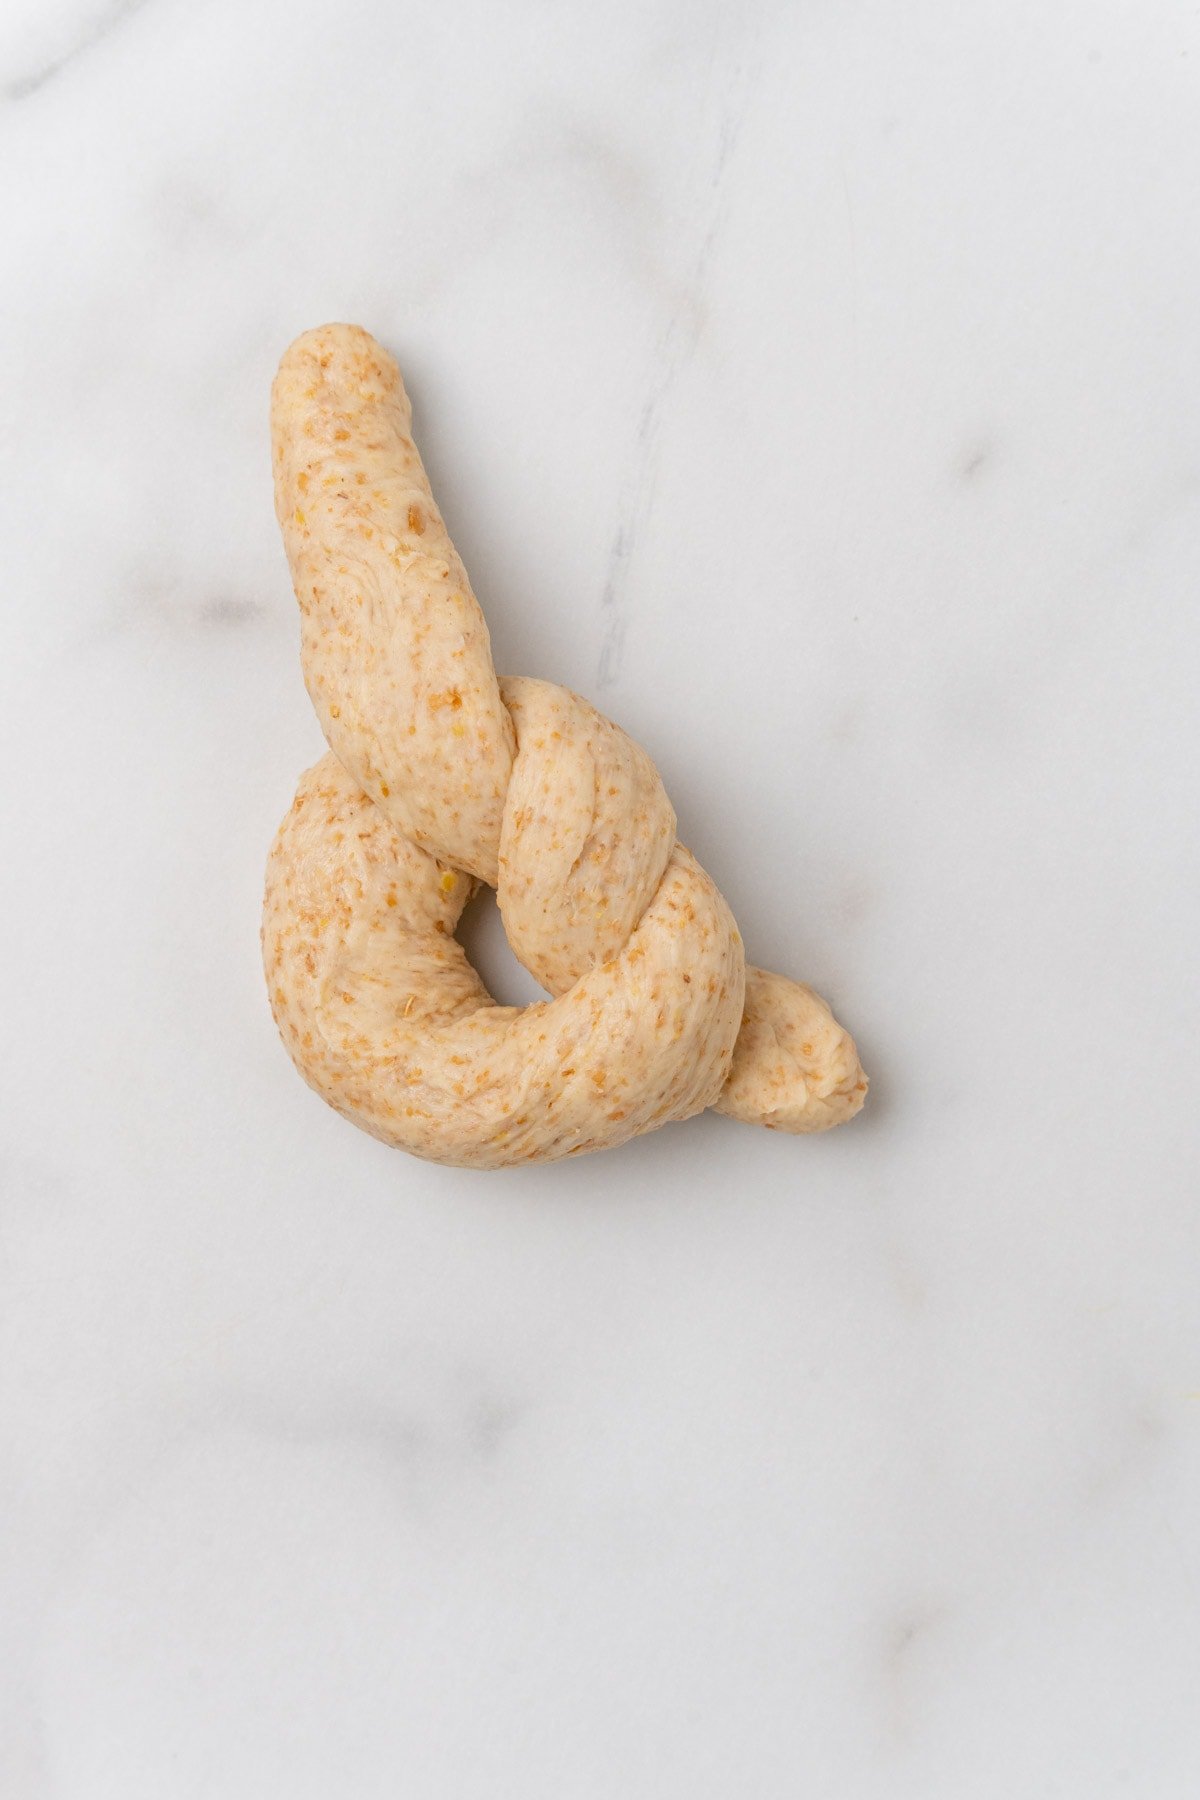 Rope of dough tied into a knot